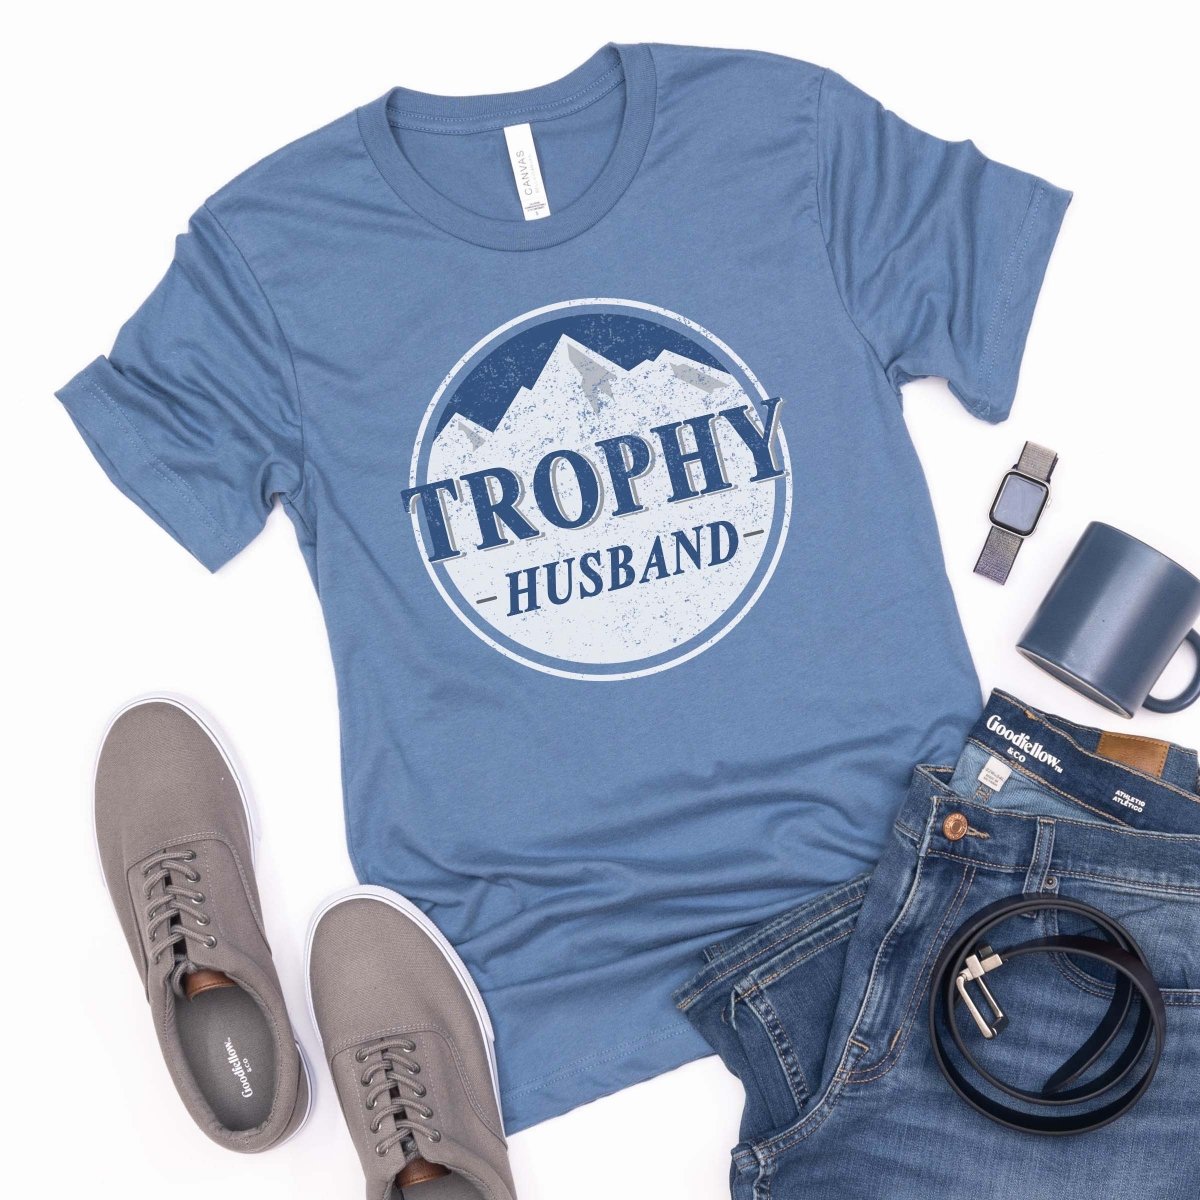 Trophy Husband Tee - Limeberry Designs